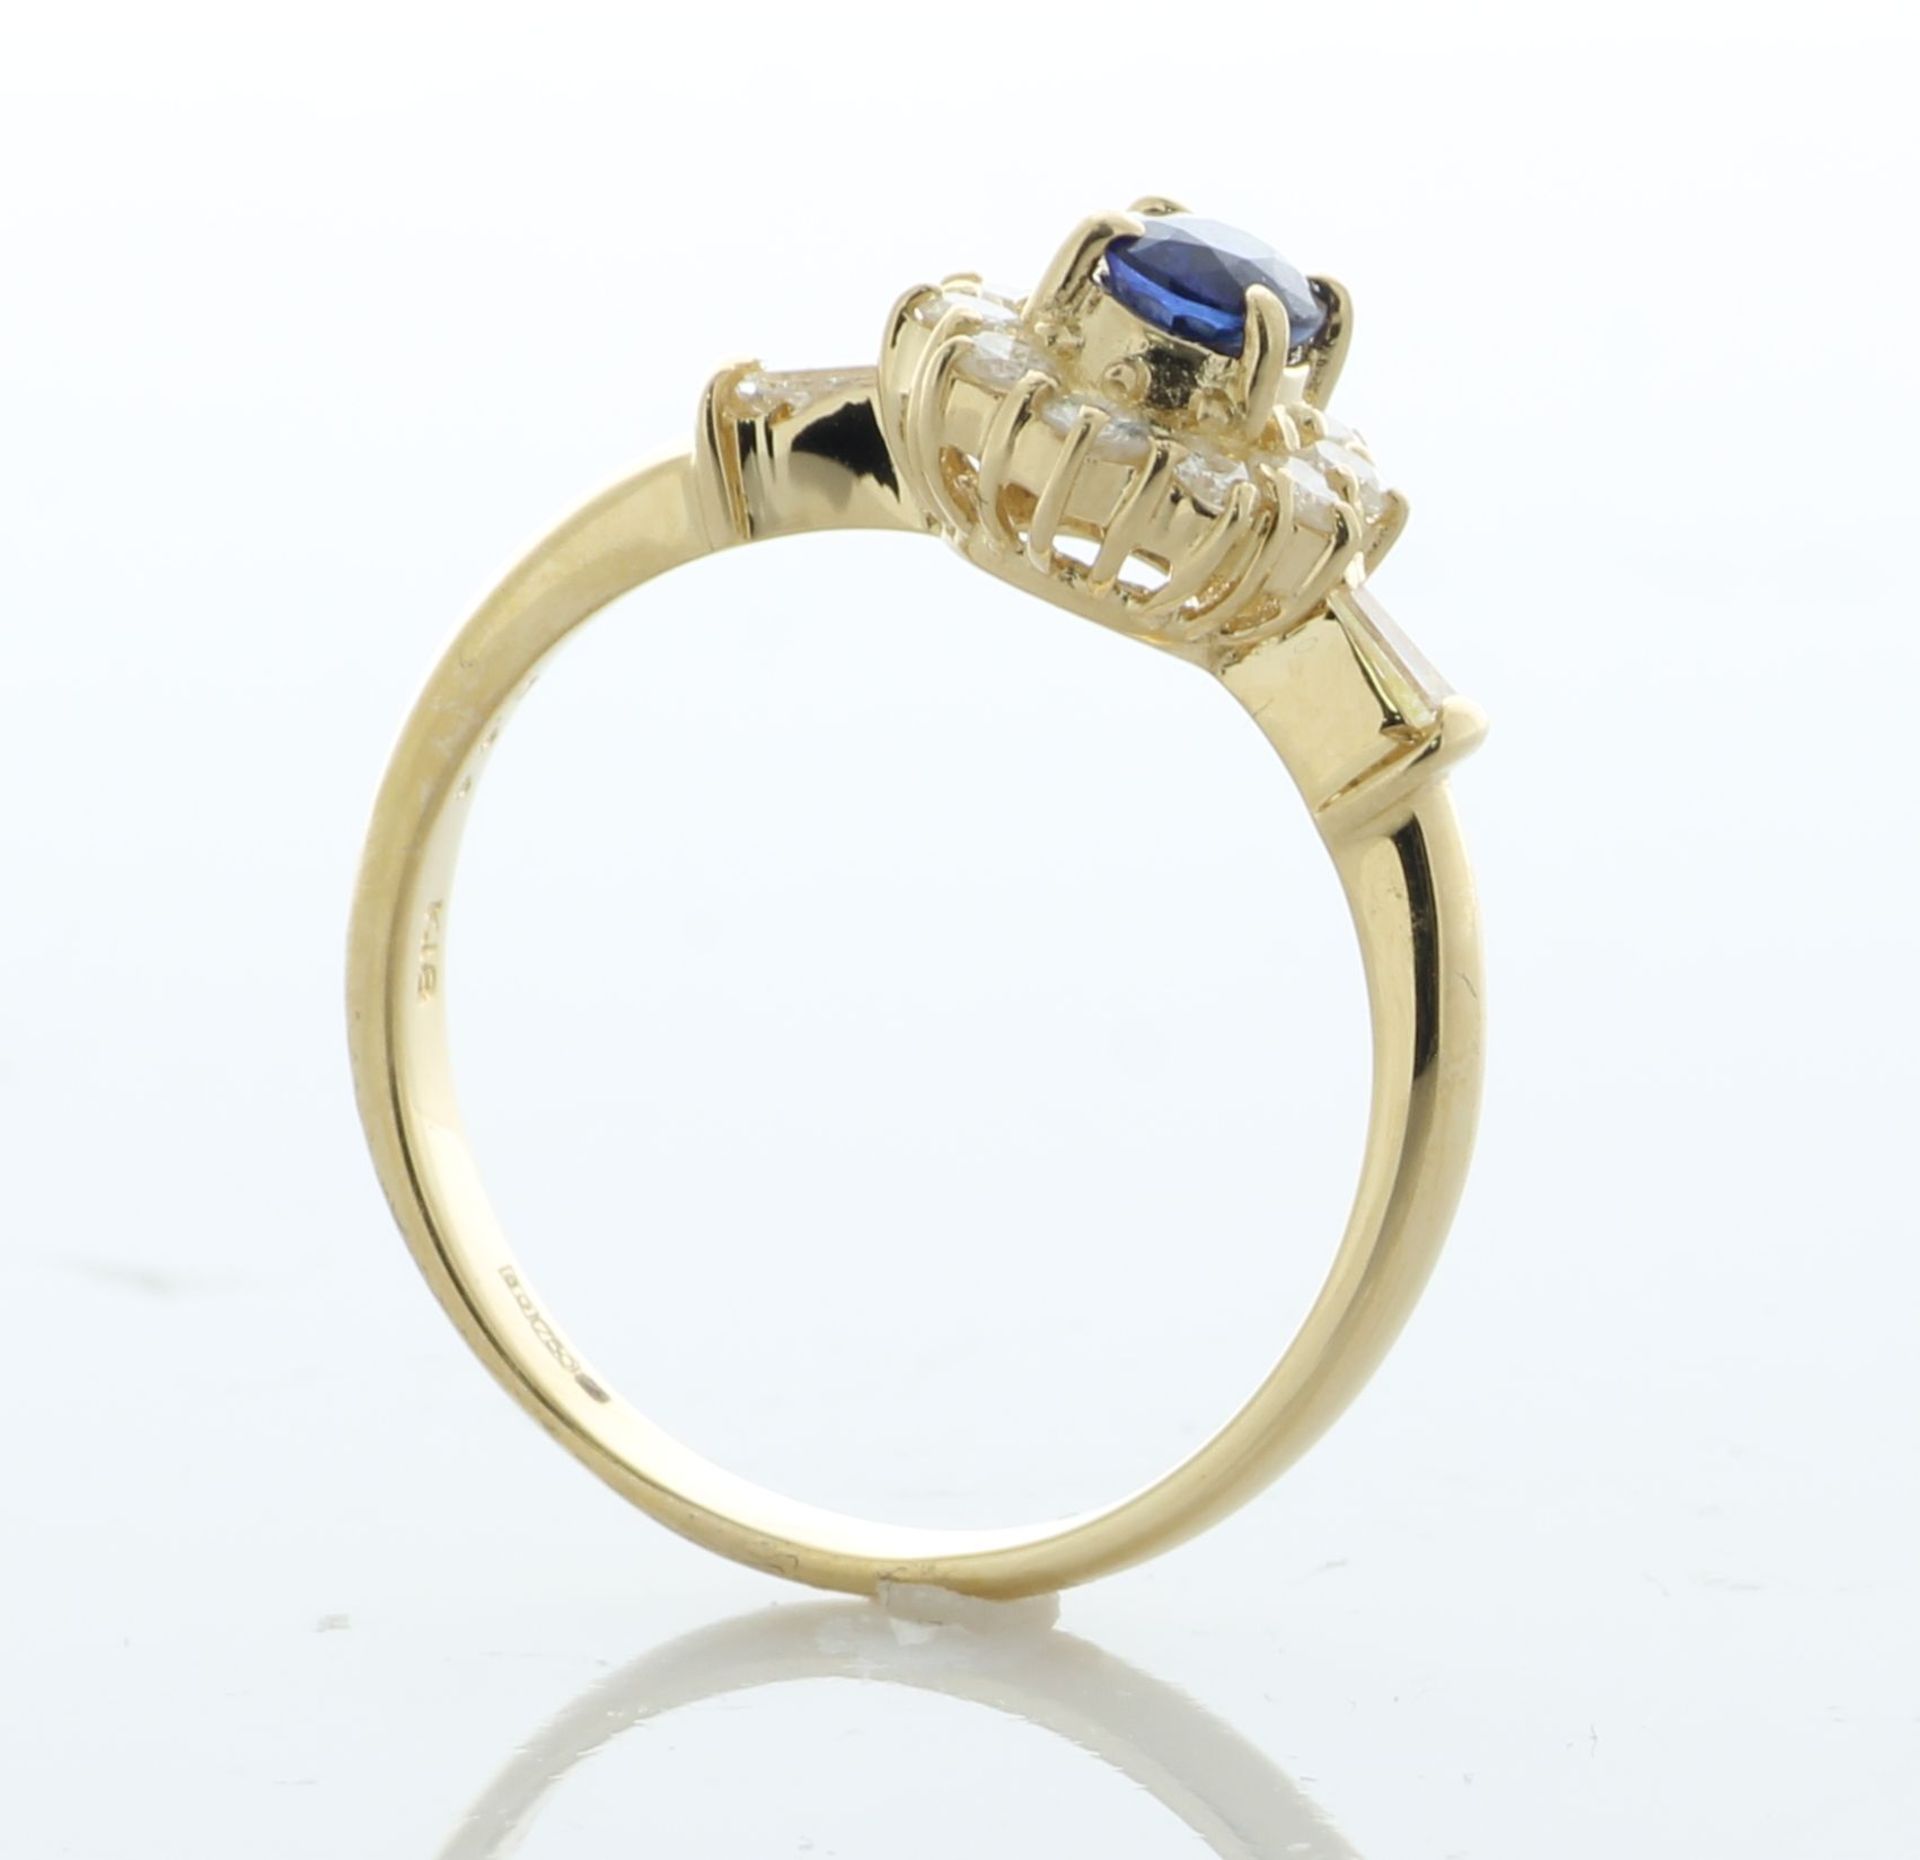 18ct Yellow Gold Oval Cut Sapphire And Diamond Ring (S0.44) 0.40 Carats - Valued By IDI £7,450. - Image 2 of 5